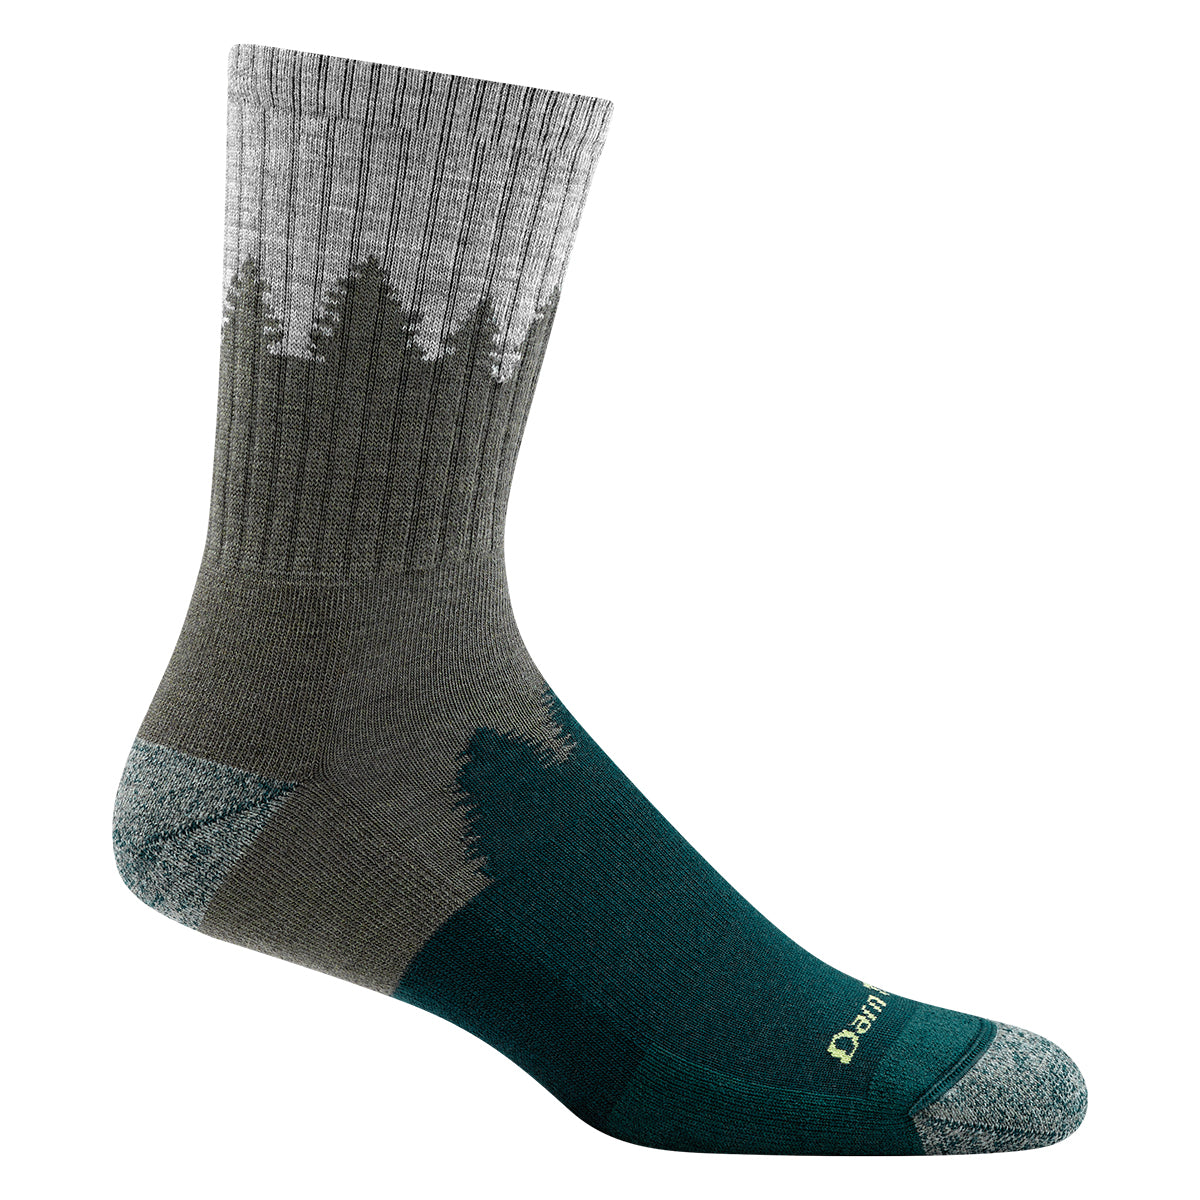 A single gray and teal hiking sock with tree patterns and reinforced toe and heel areas. Made from merino wool, this men's DARN TOUGH NUMBER 2 GREEN CREW is branded with "Darn Tough" text near the toe.